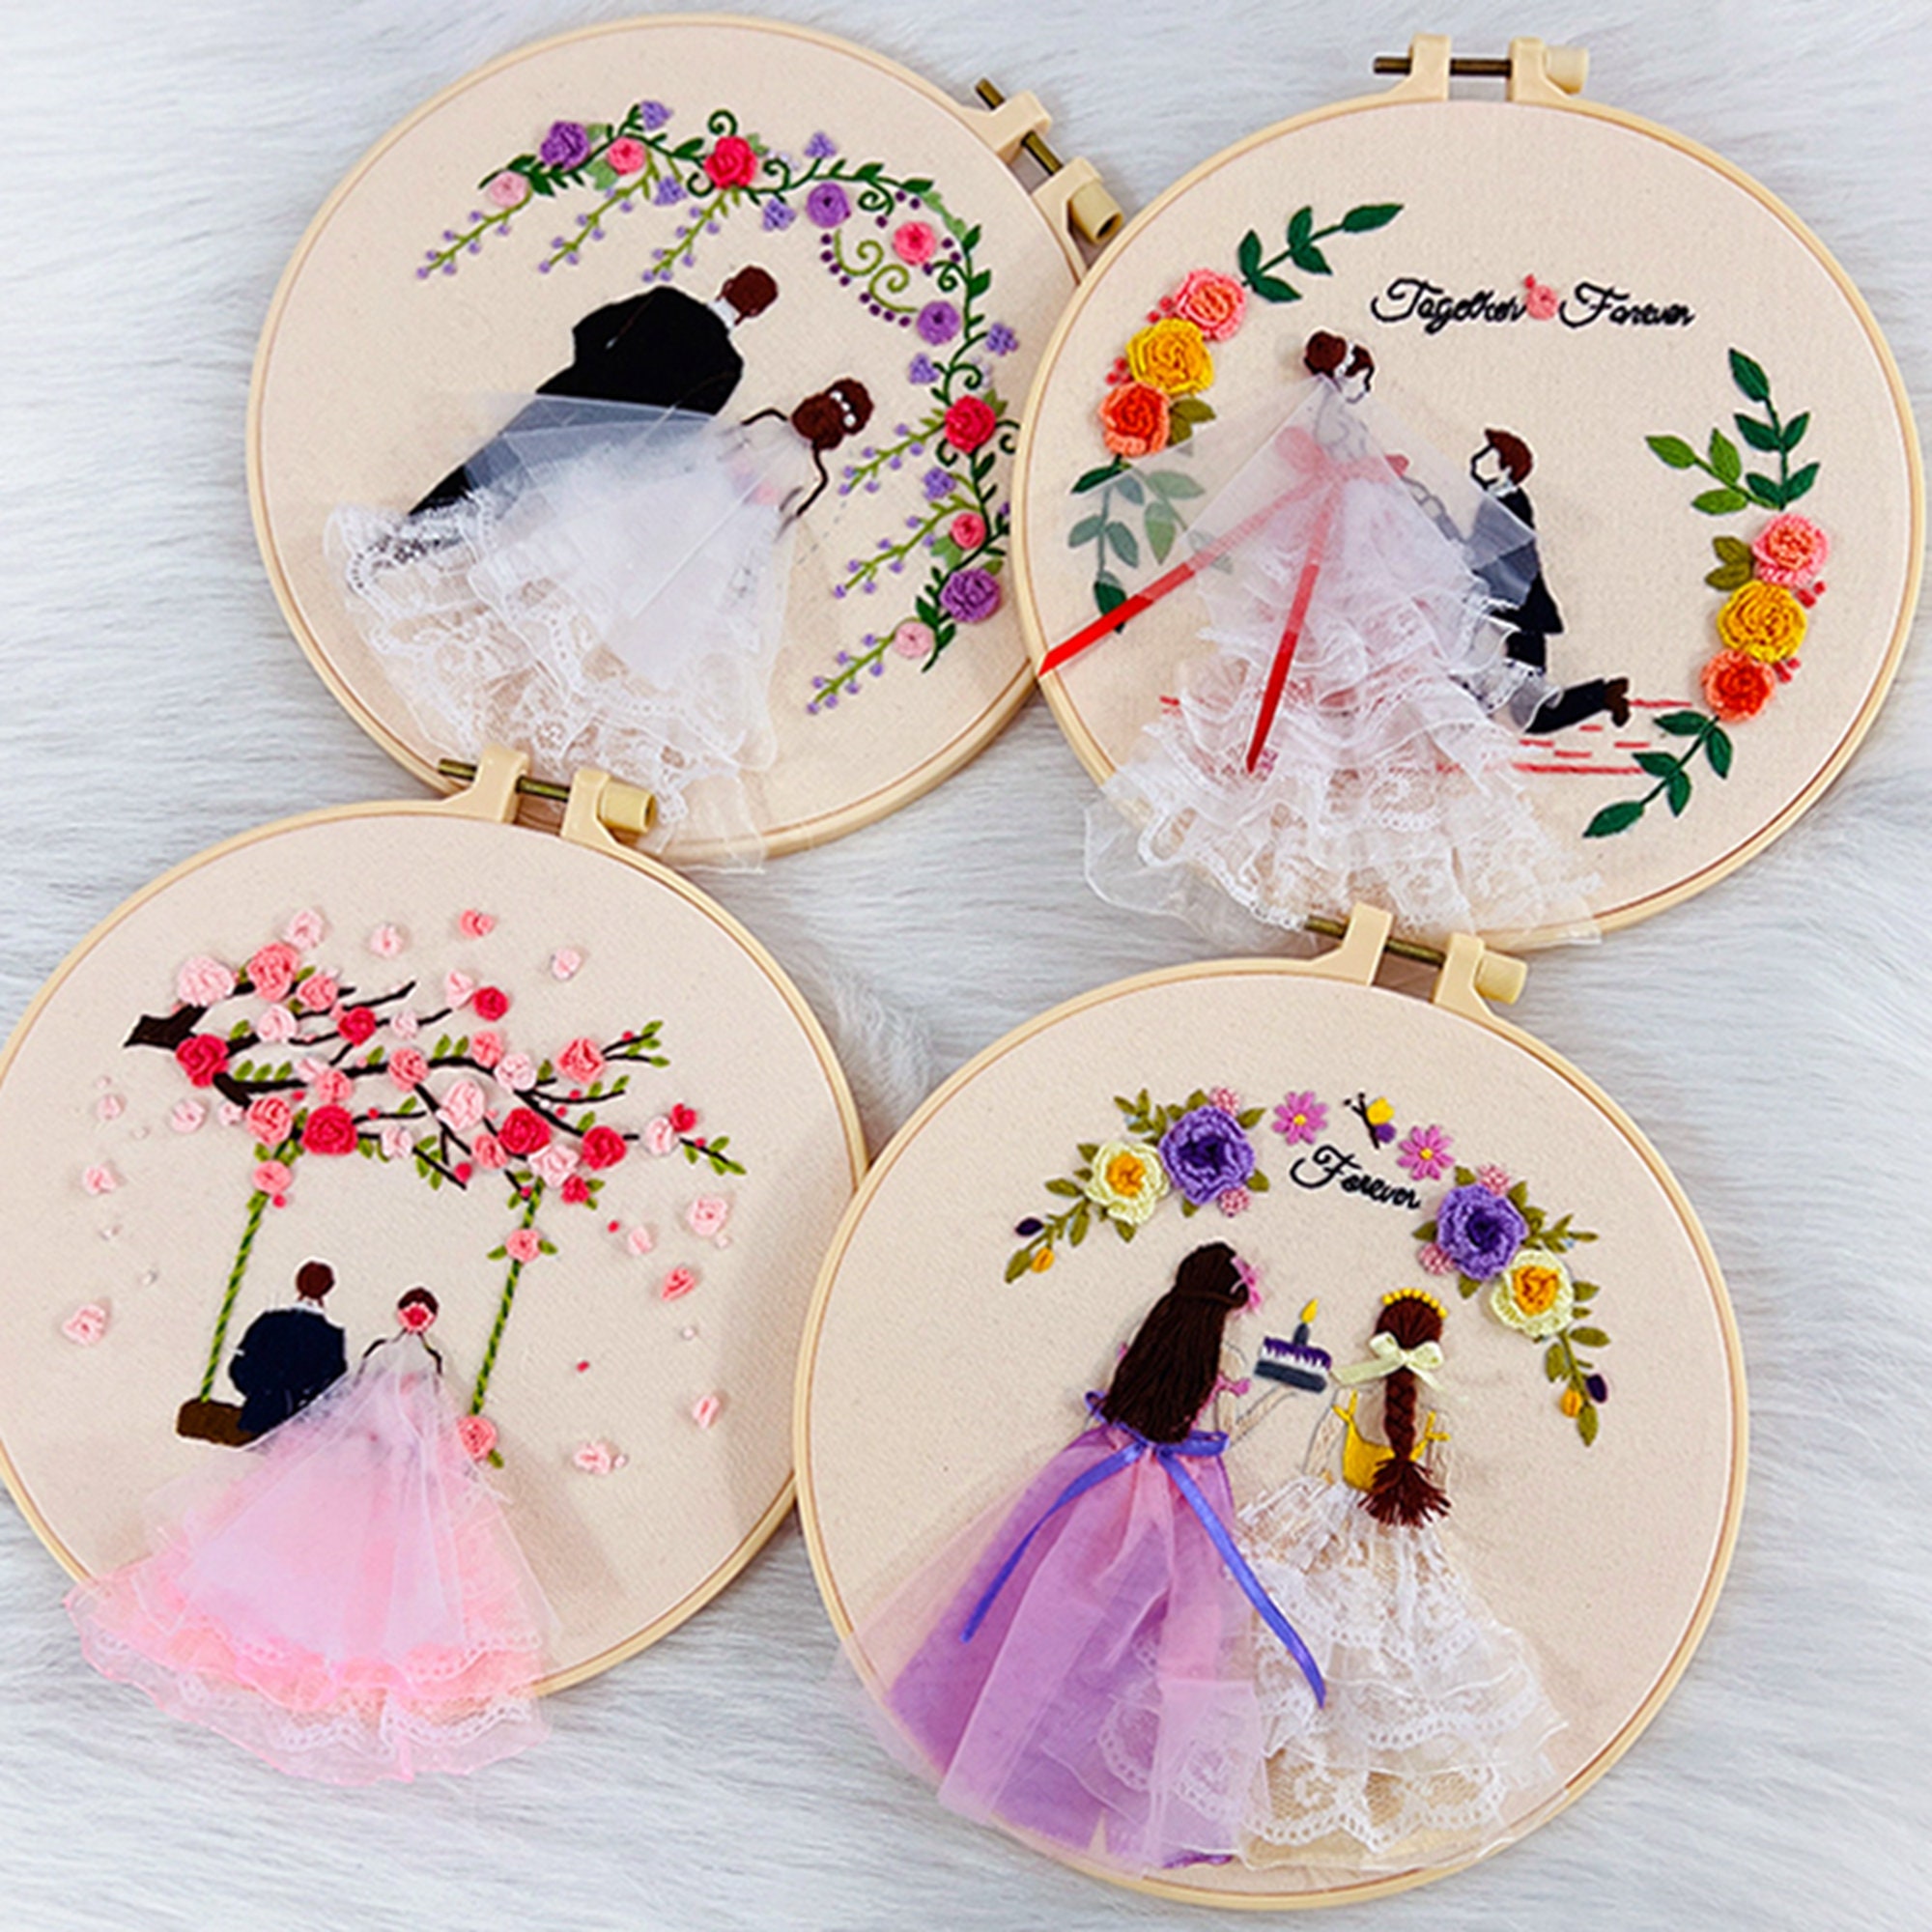 10-20cm Embroidery Hoops Frame Set Magic Embroidery Hoop Rings For